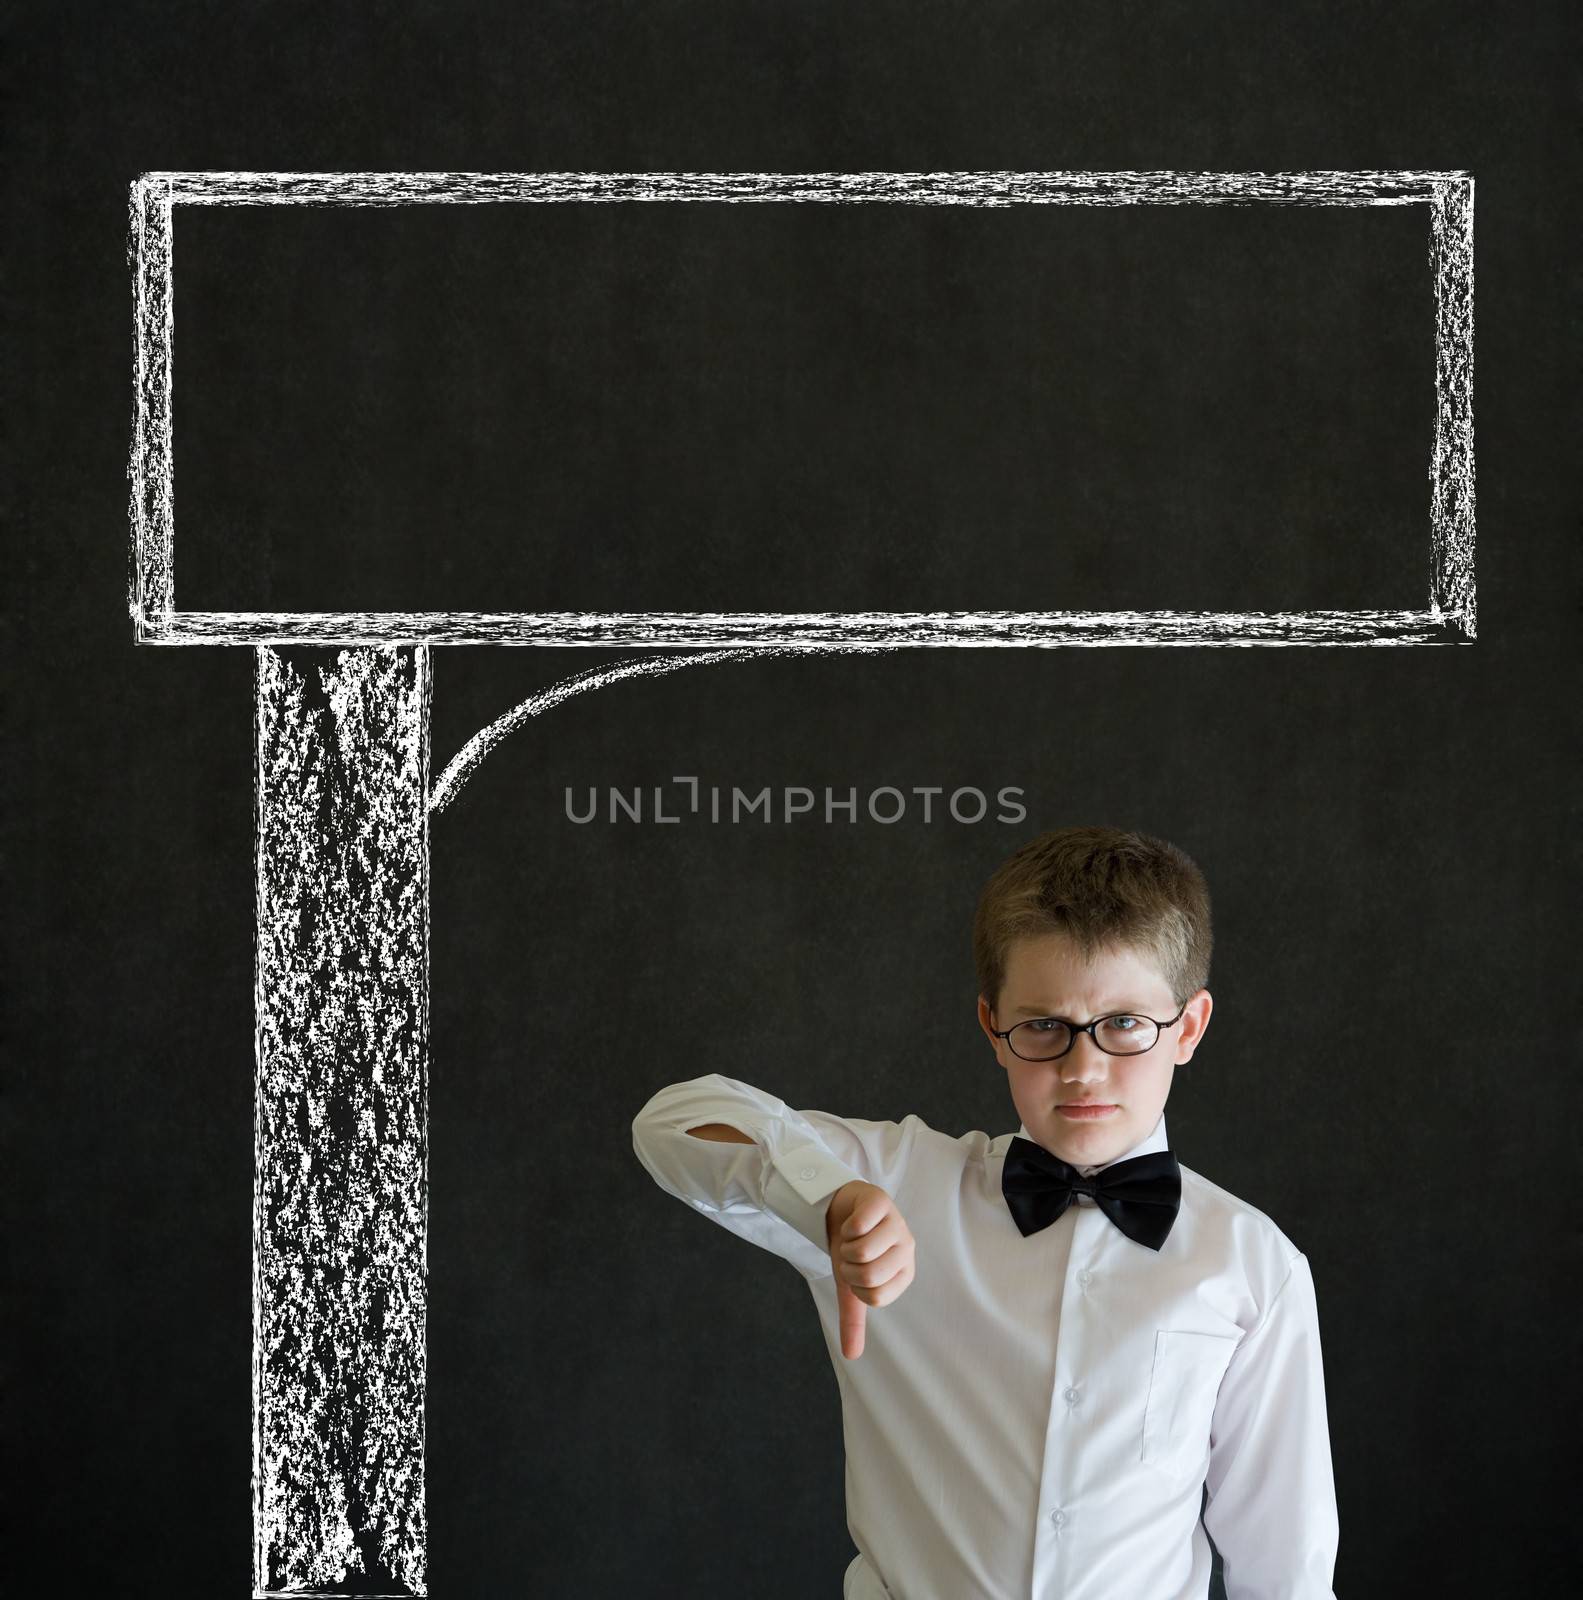 Thumbs down boy dressed up as business man with chalk road advertising sign on blackboard background